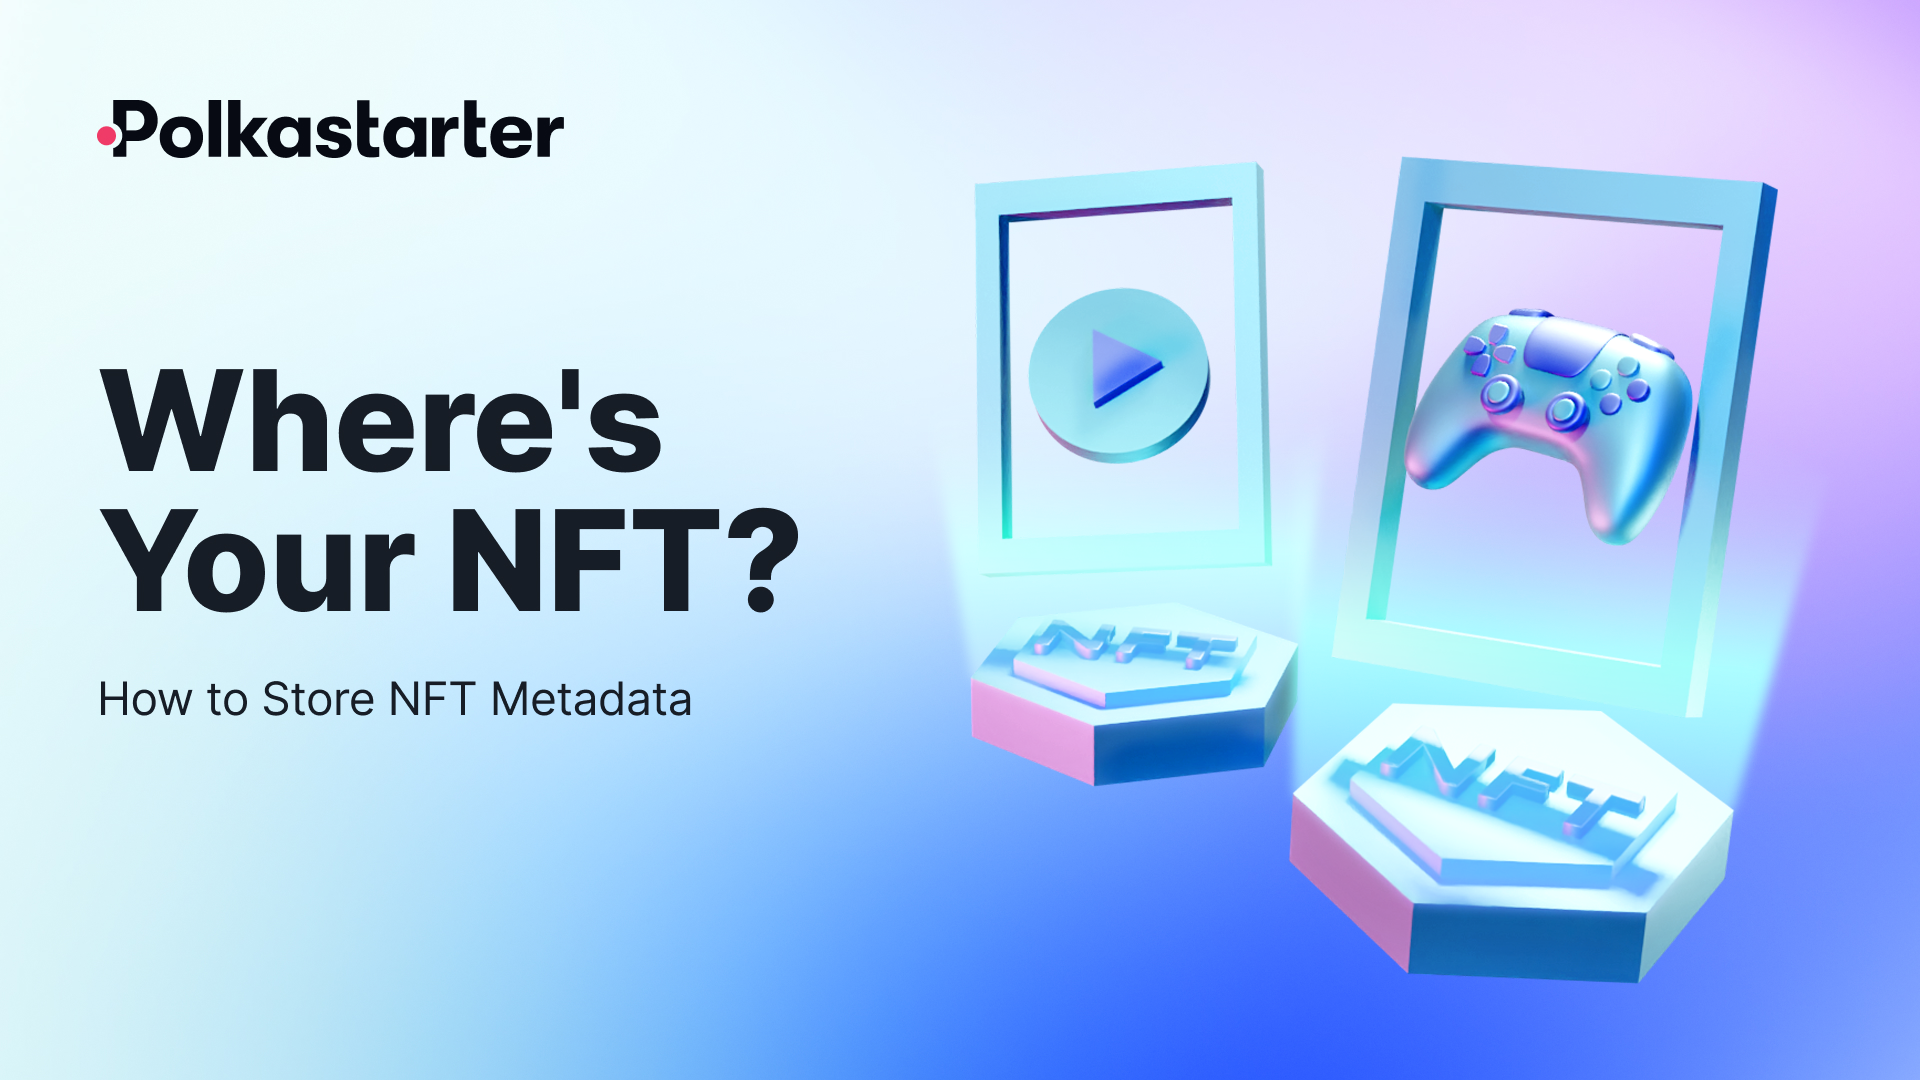 Where's Your NFT? How to Store NFT Metadata